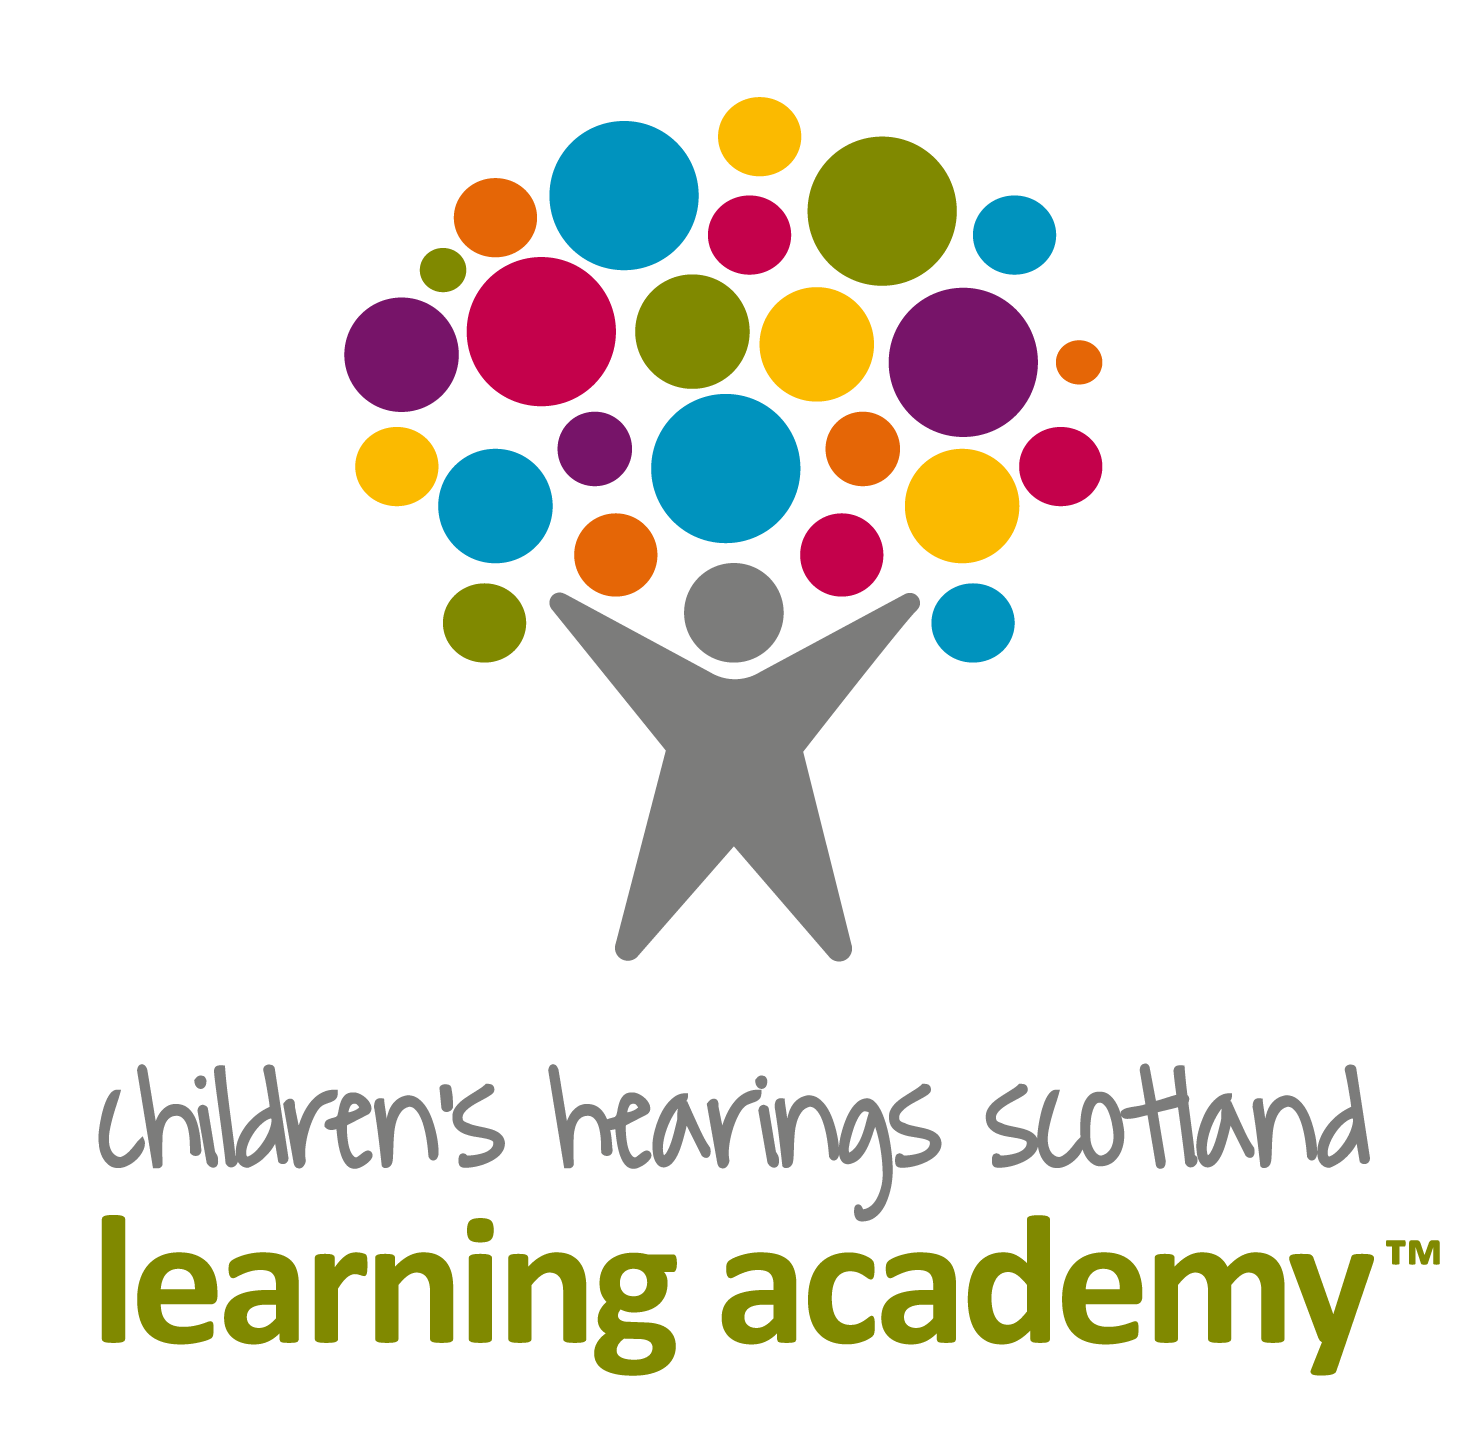 Children's Hearings Scotland Learning Academy